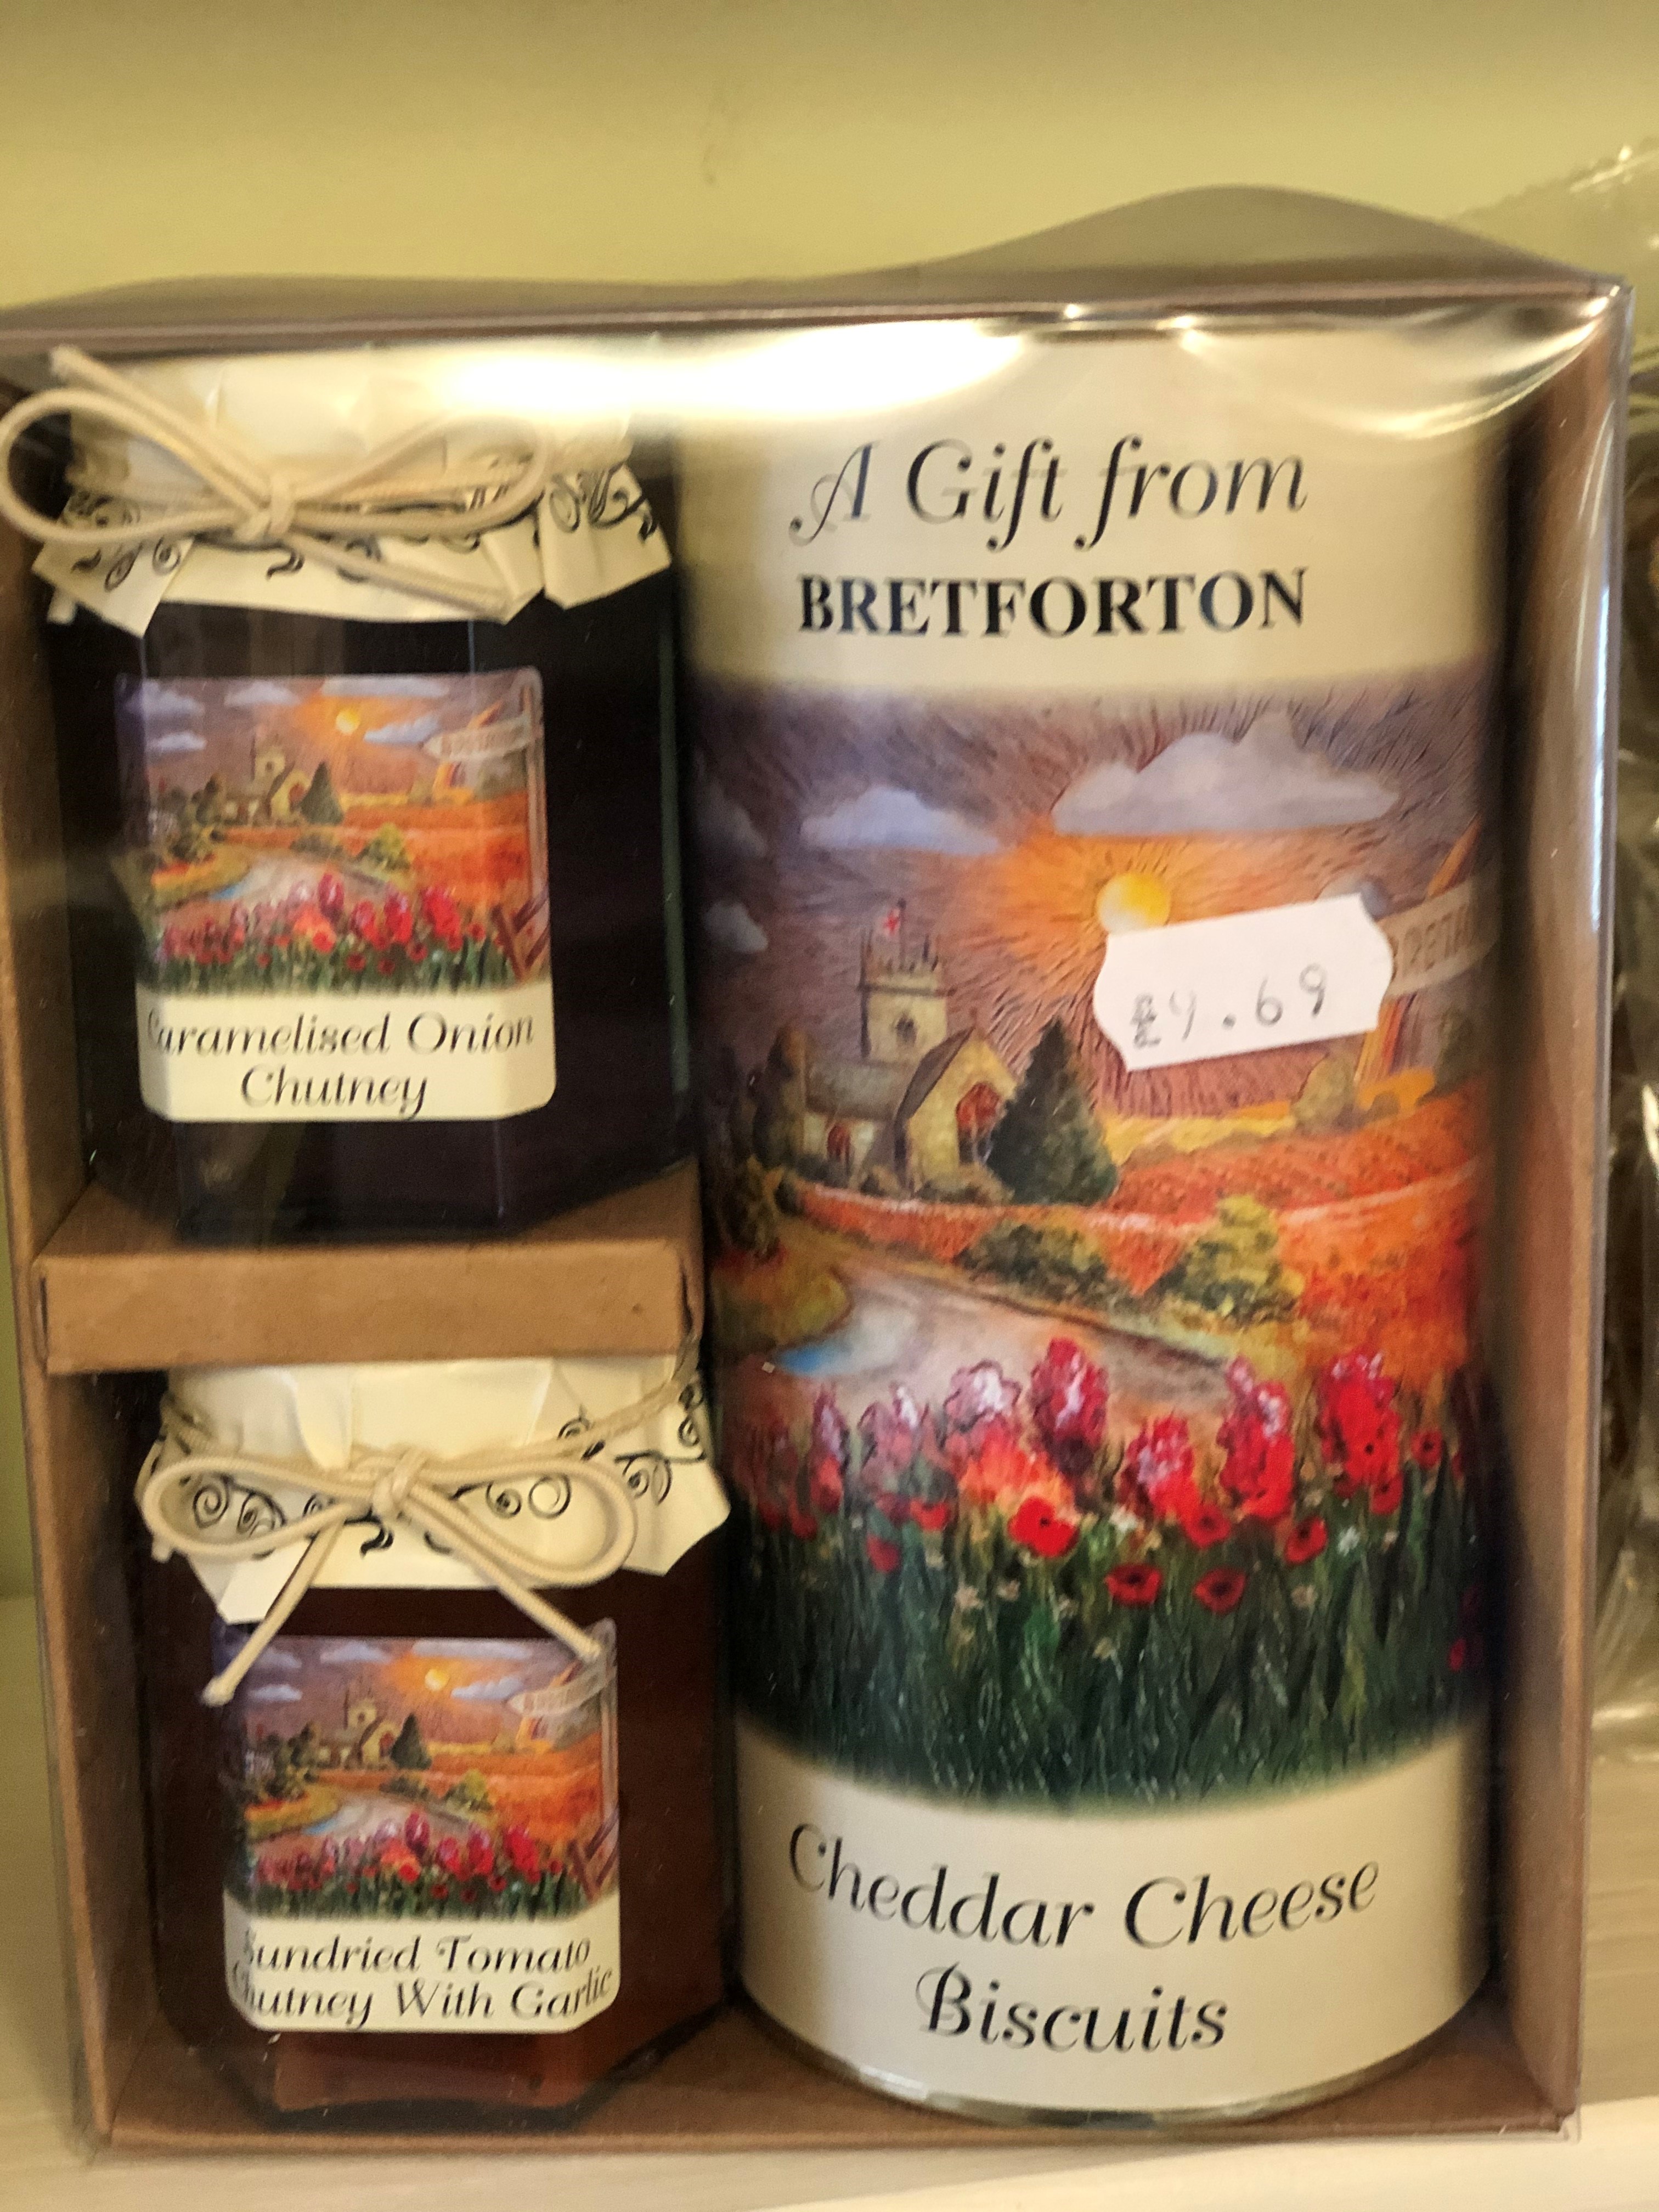 A photo of a gift pack of "Gifts from Bretforton", showing jars of caramelised onion chutney, sundried tomato chutney and a tube of cheddar cheese biscuits. Gifts have a reproduction of the oil painting of Bretforton that is displayed in the Shop on them